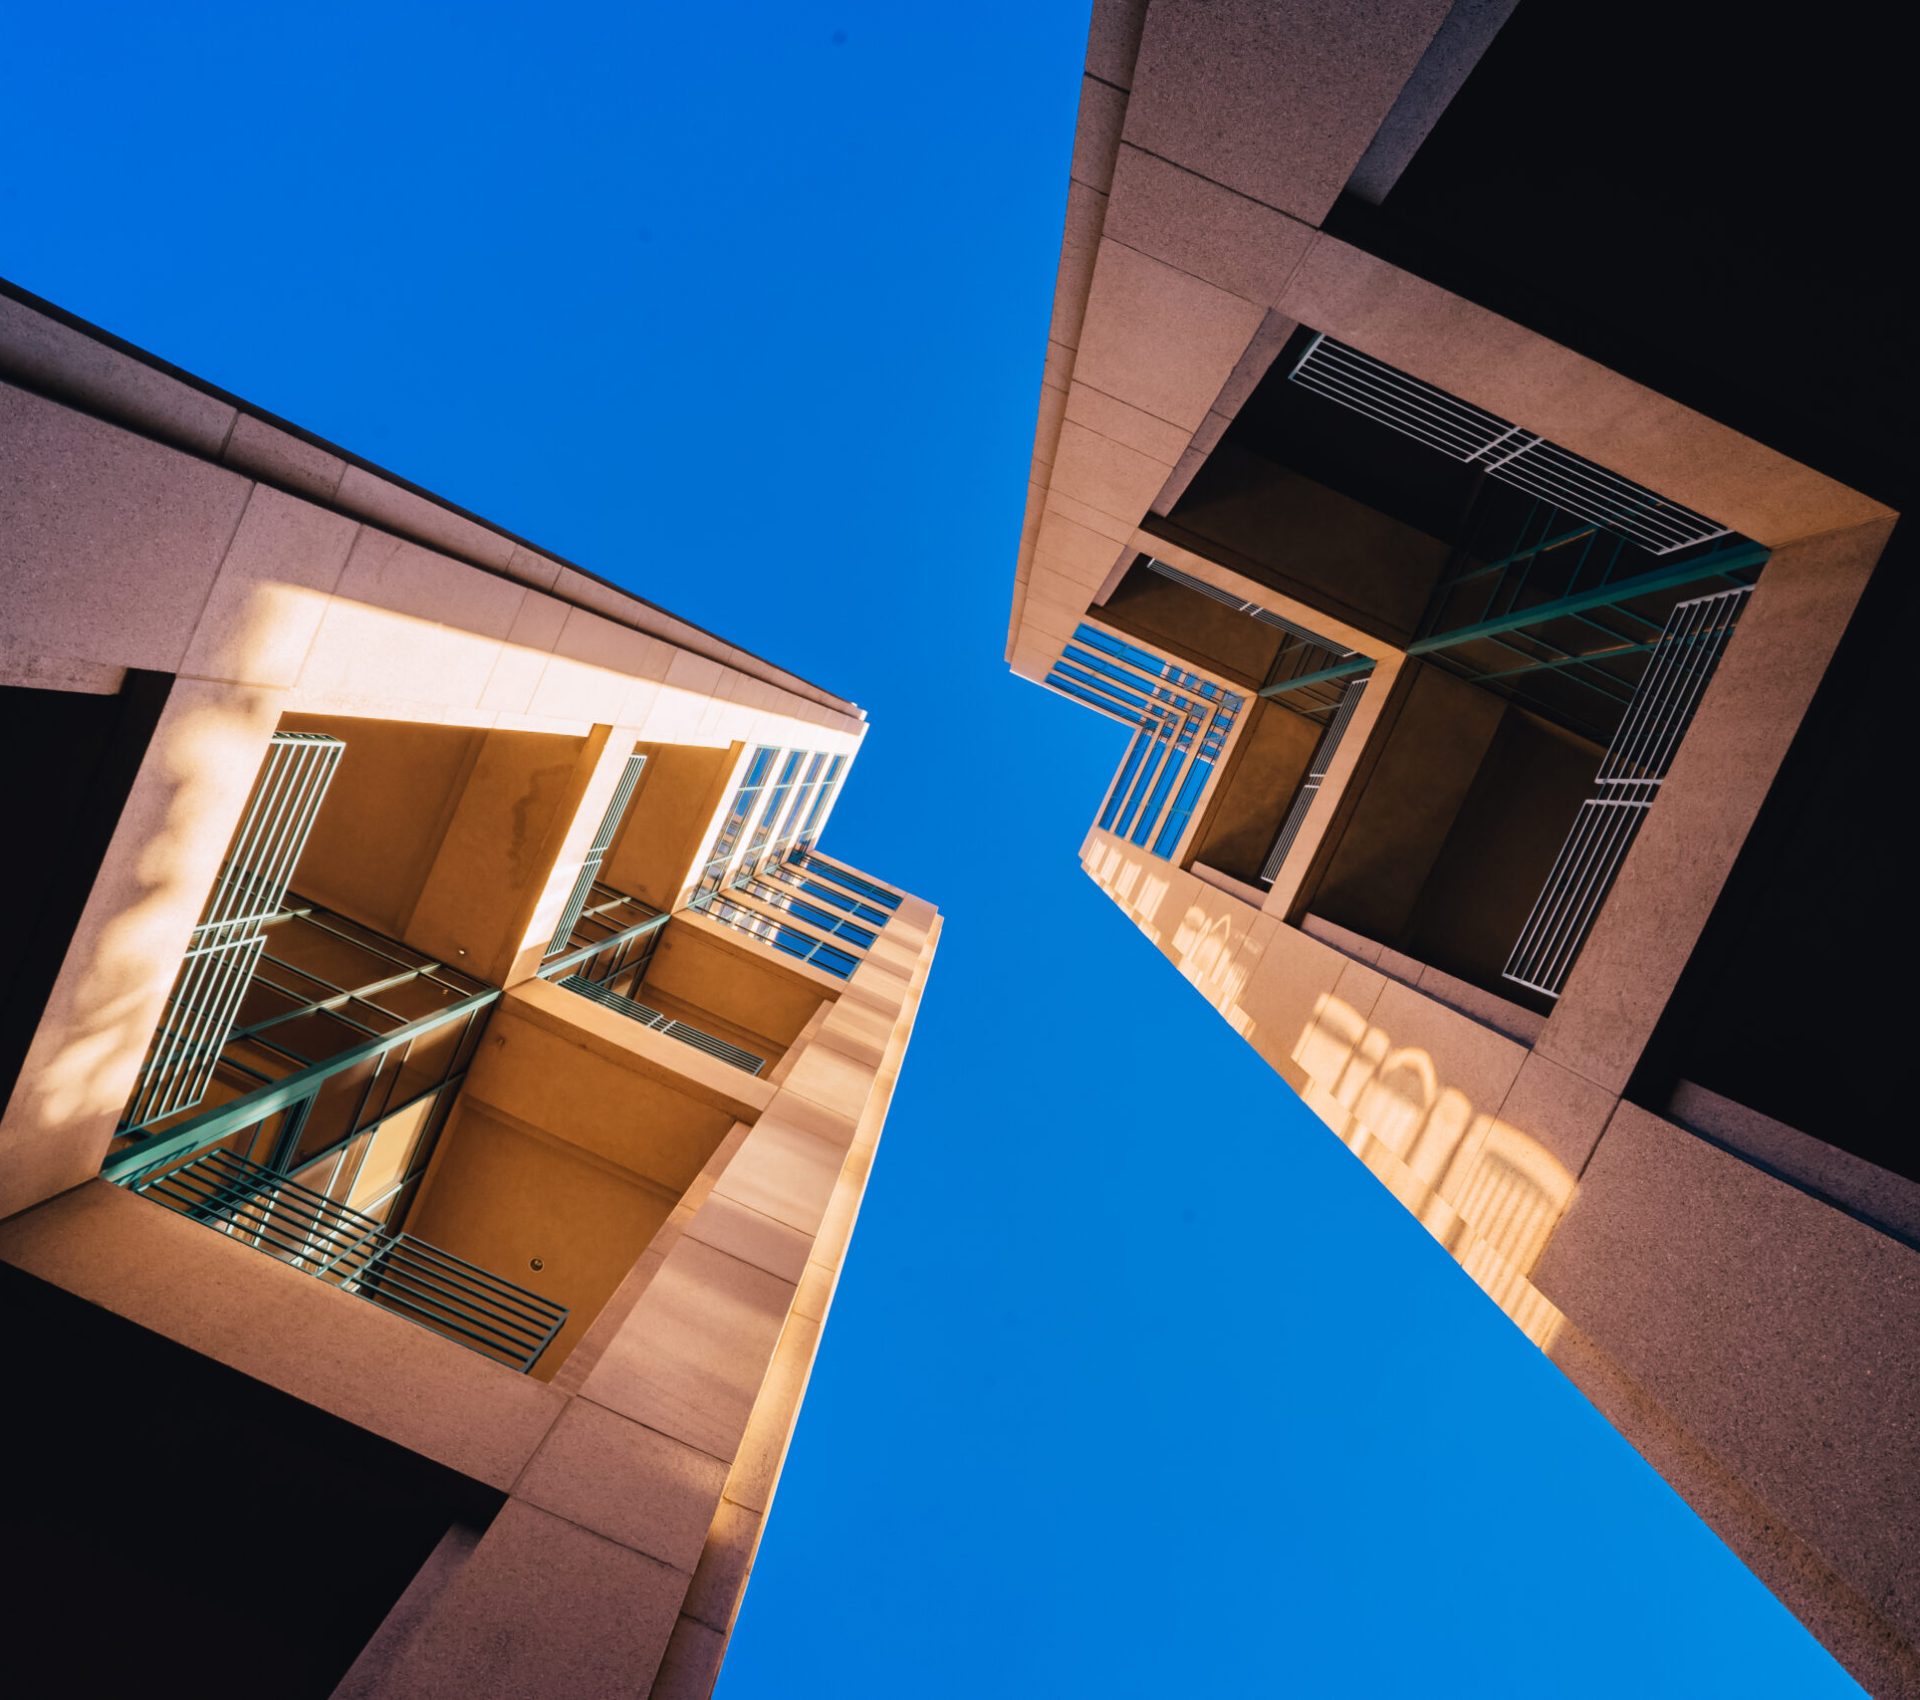 A frog's eye view of architectural twin buildings against a clear blue sky